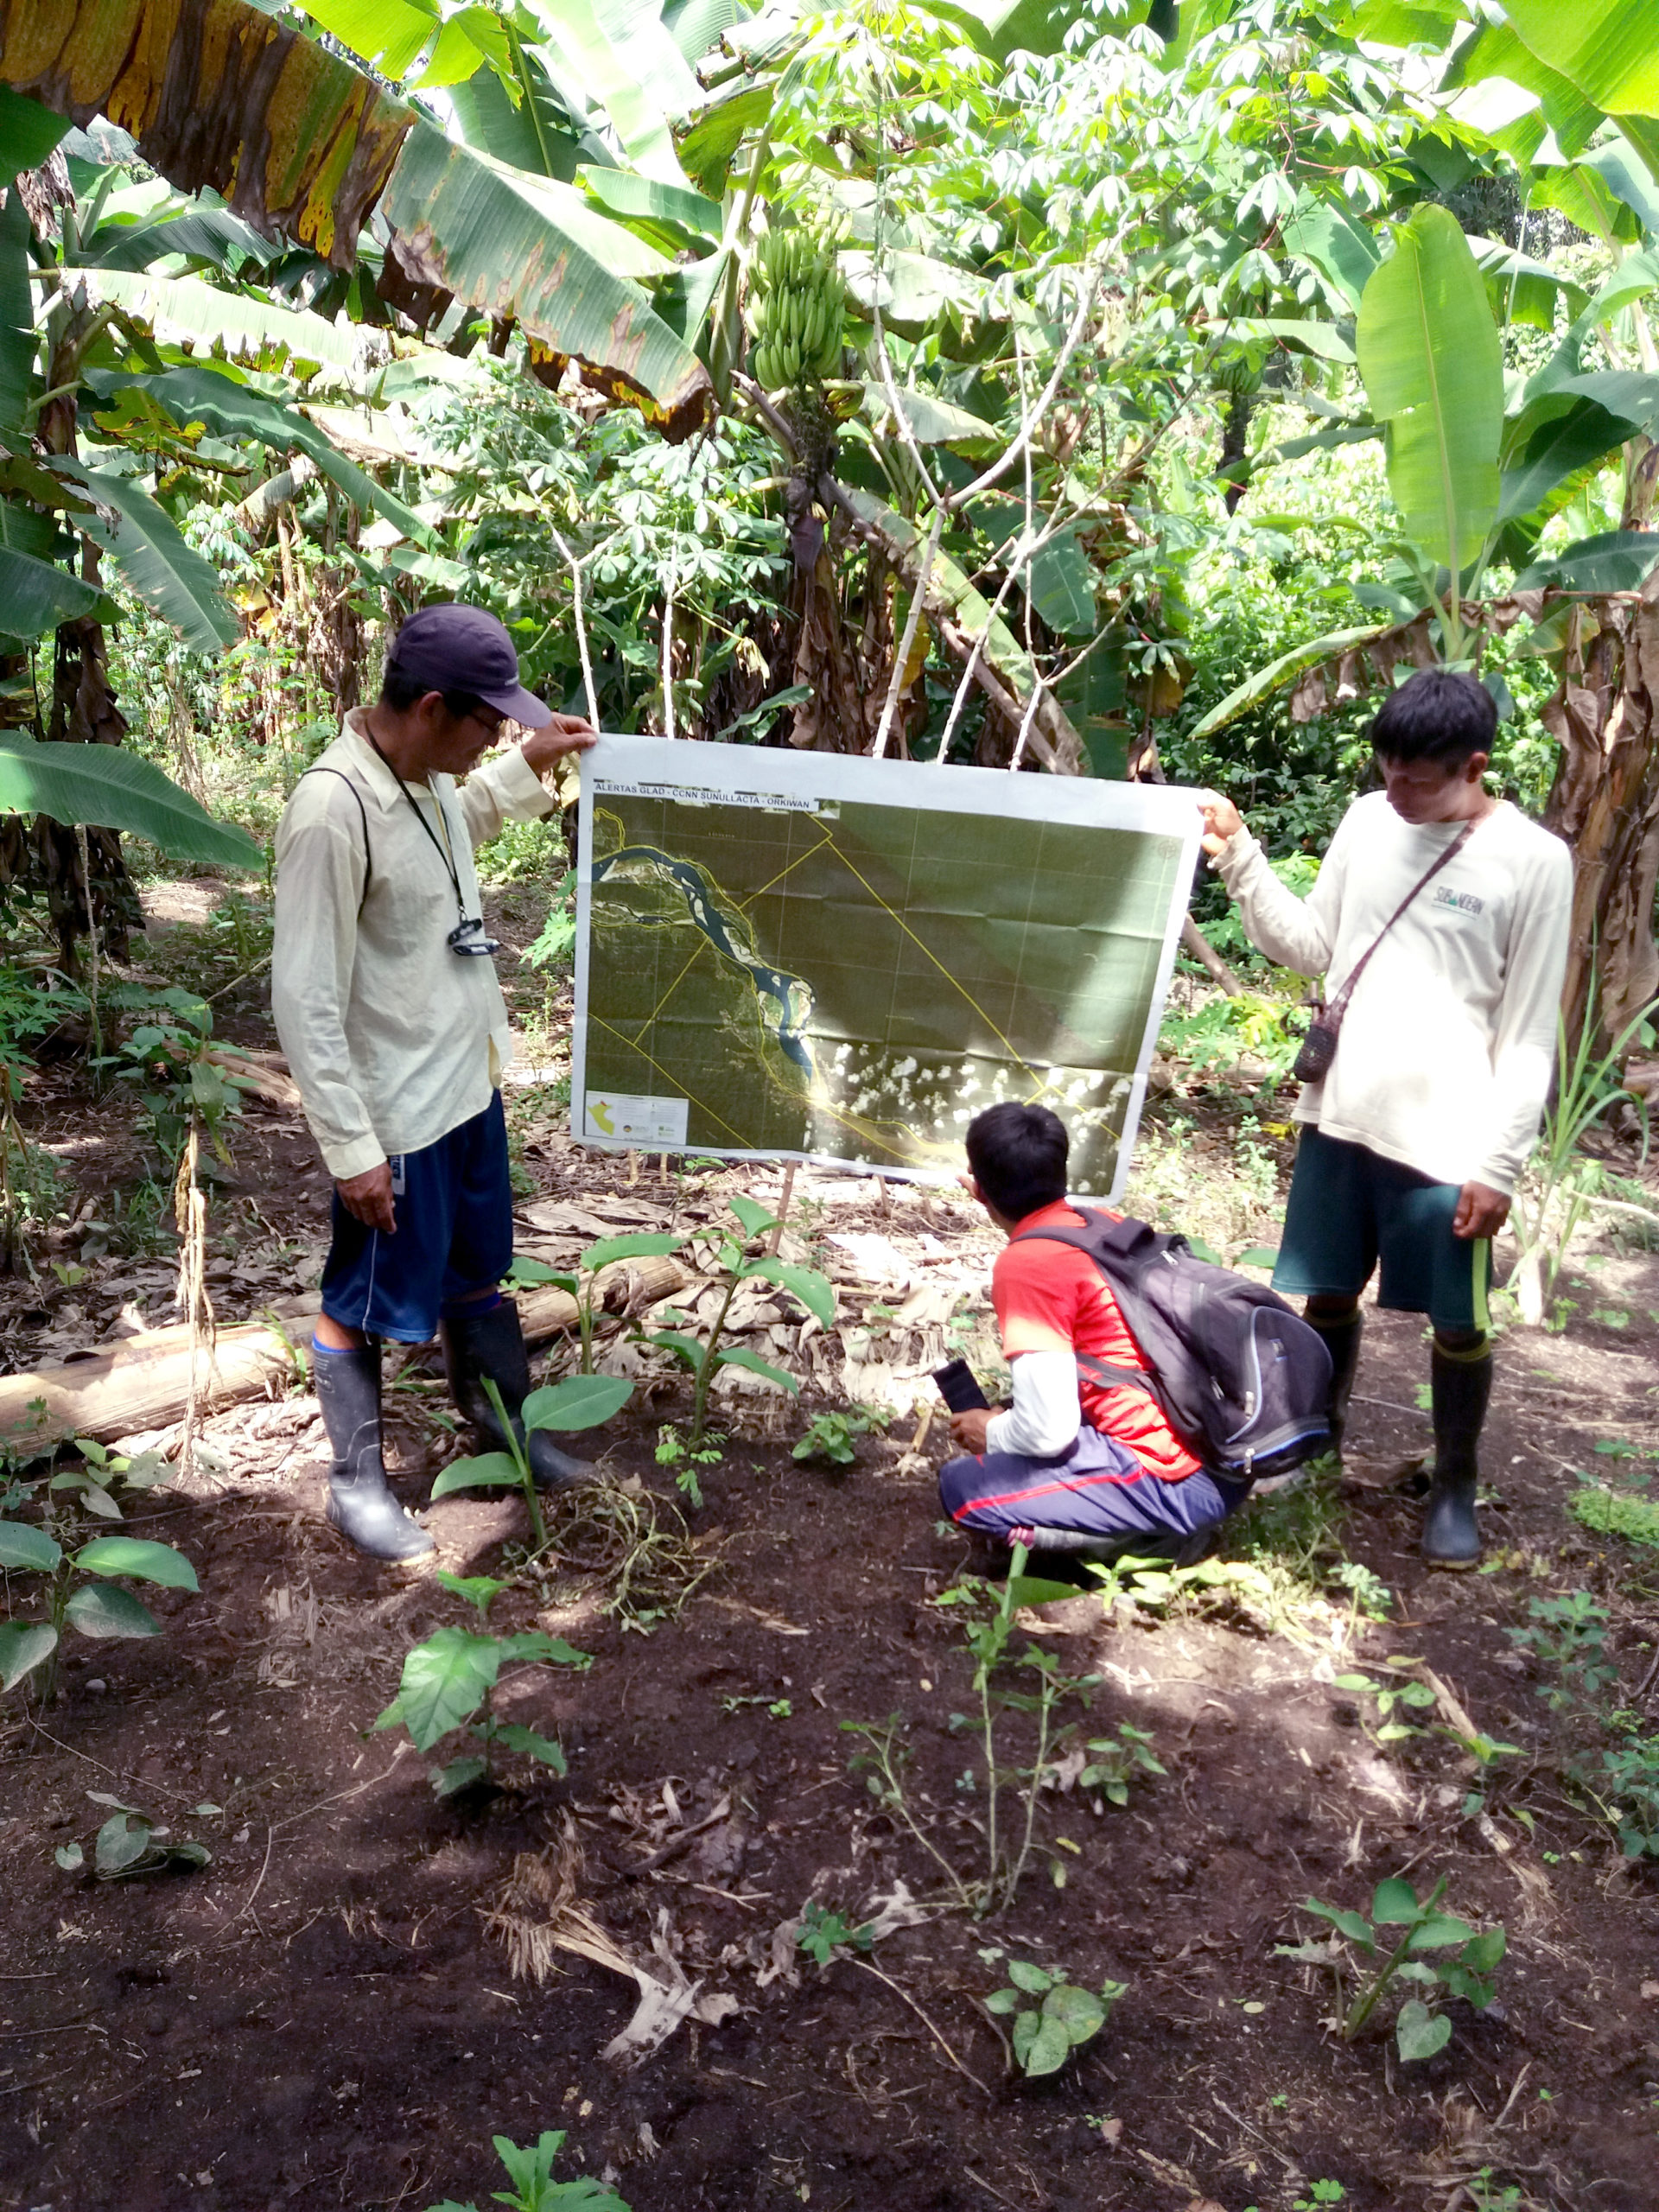 Three indigenous men study a map surrounded by rainforest